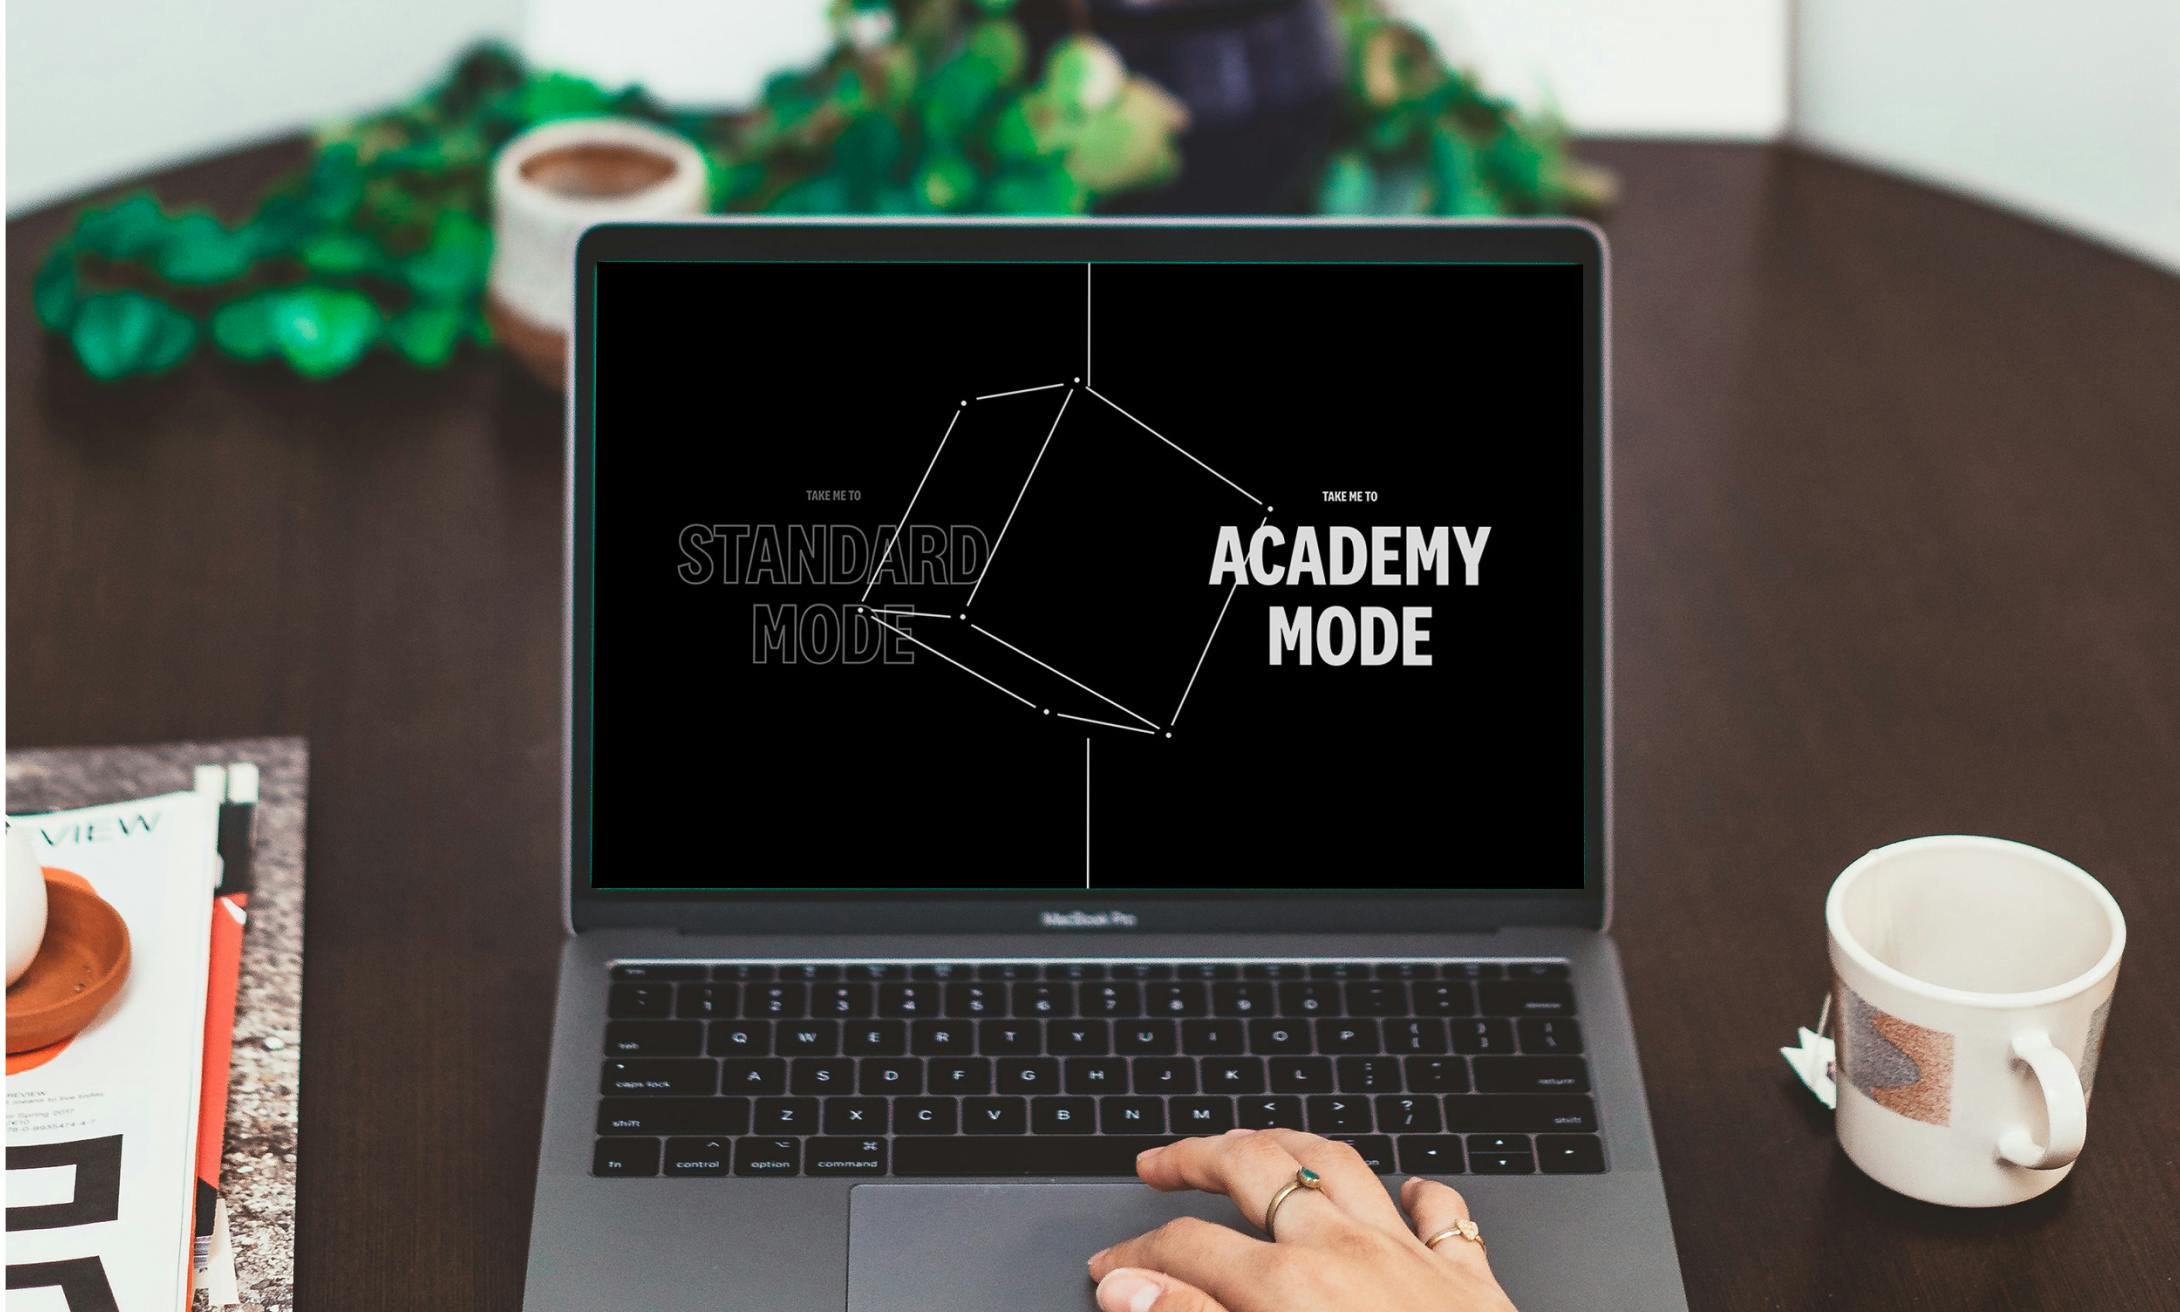 A person choosing to enter a site in either standard mode or academy mode